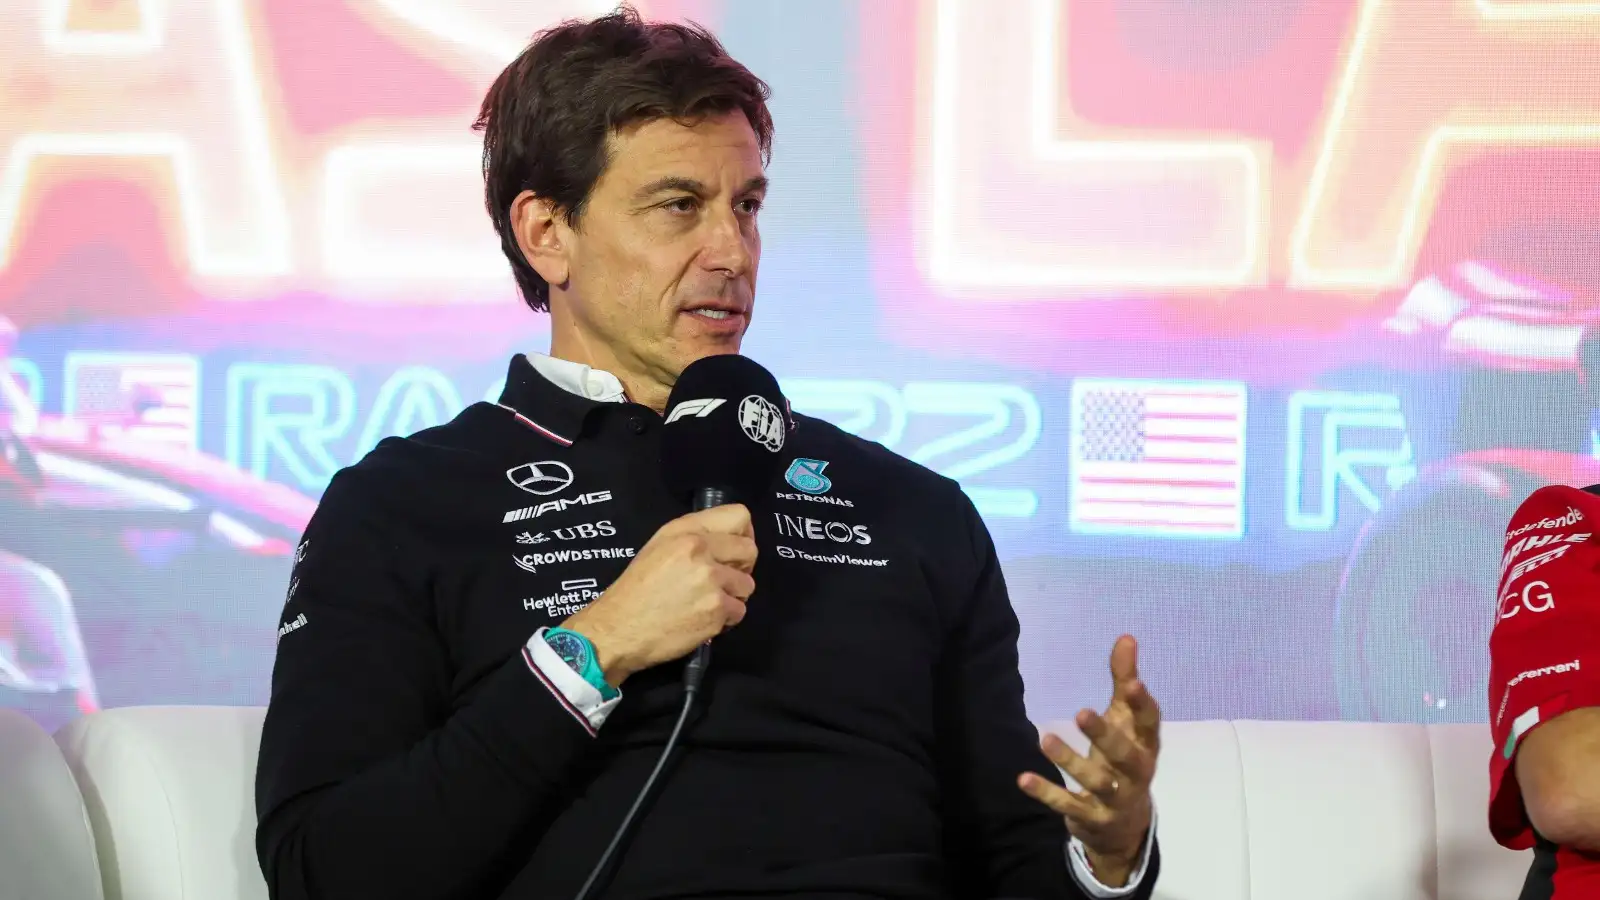 Toto Wolff speaks into a microphone.